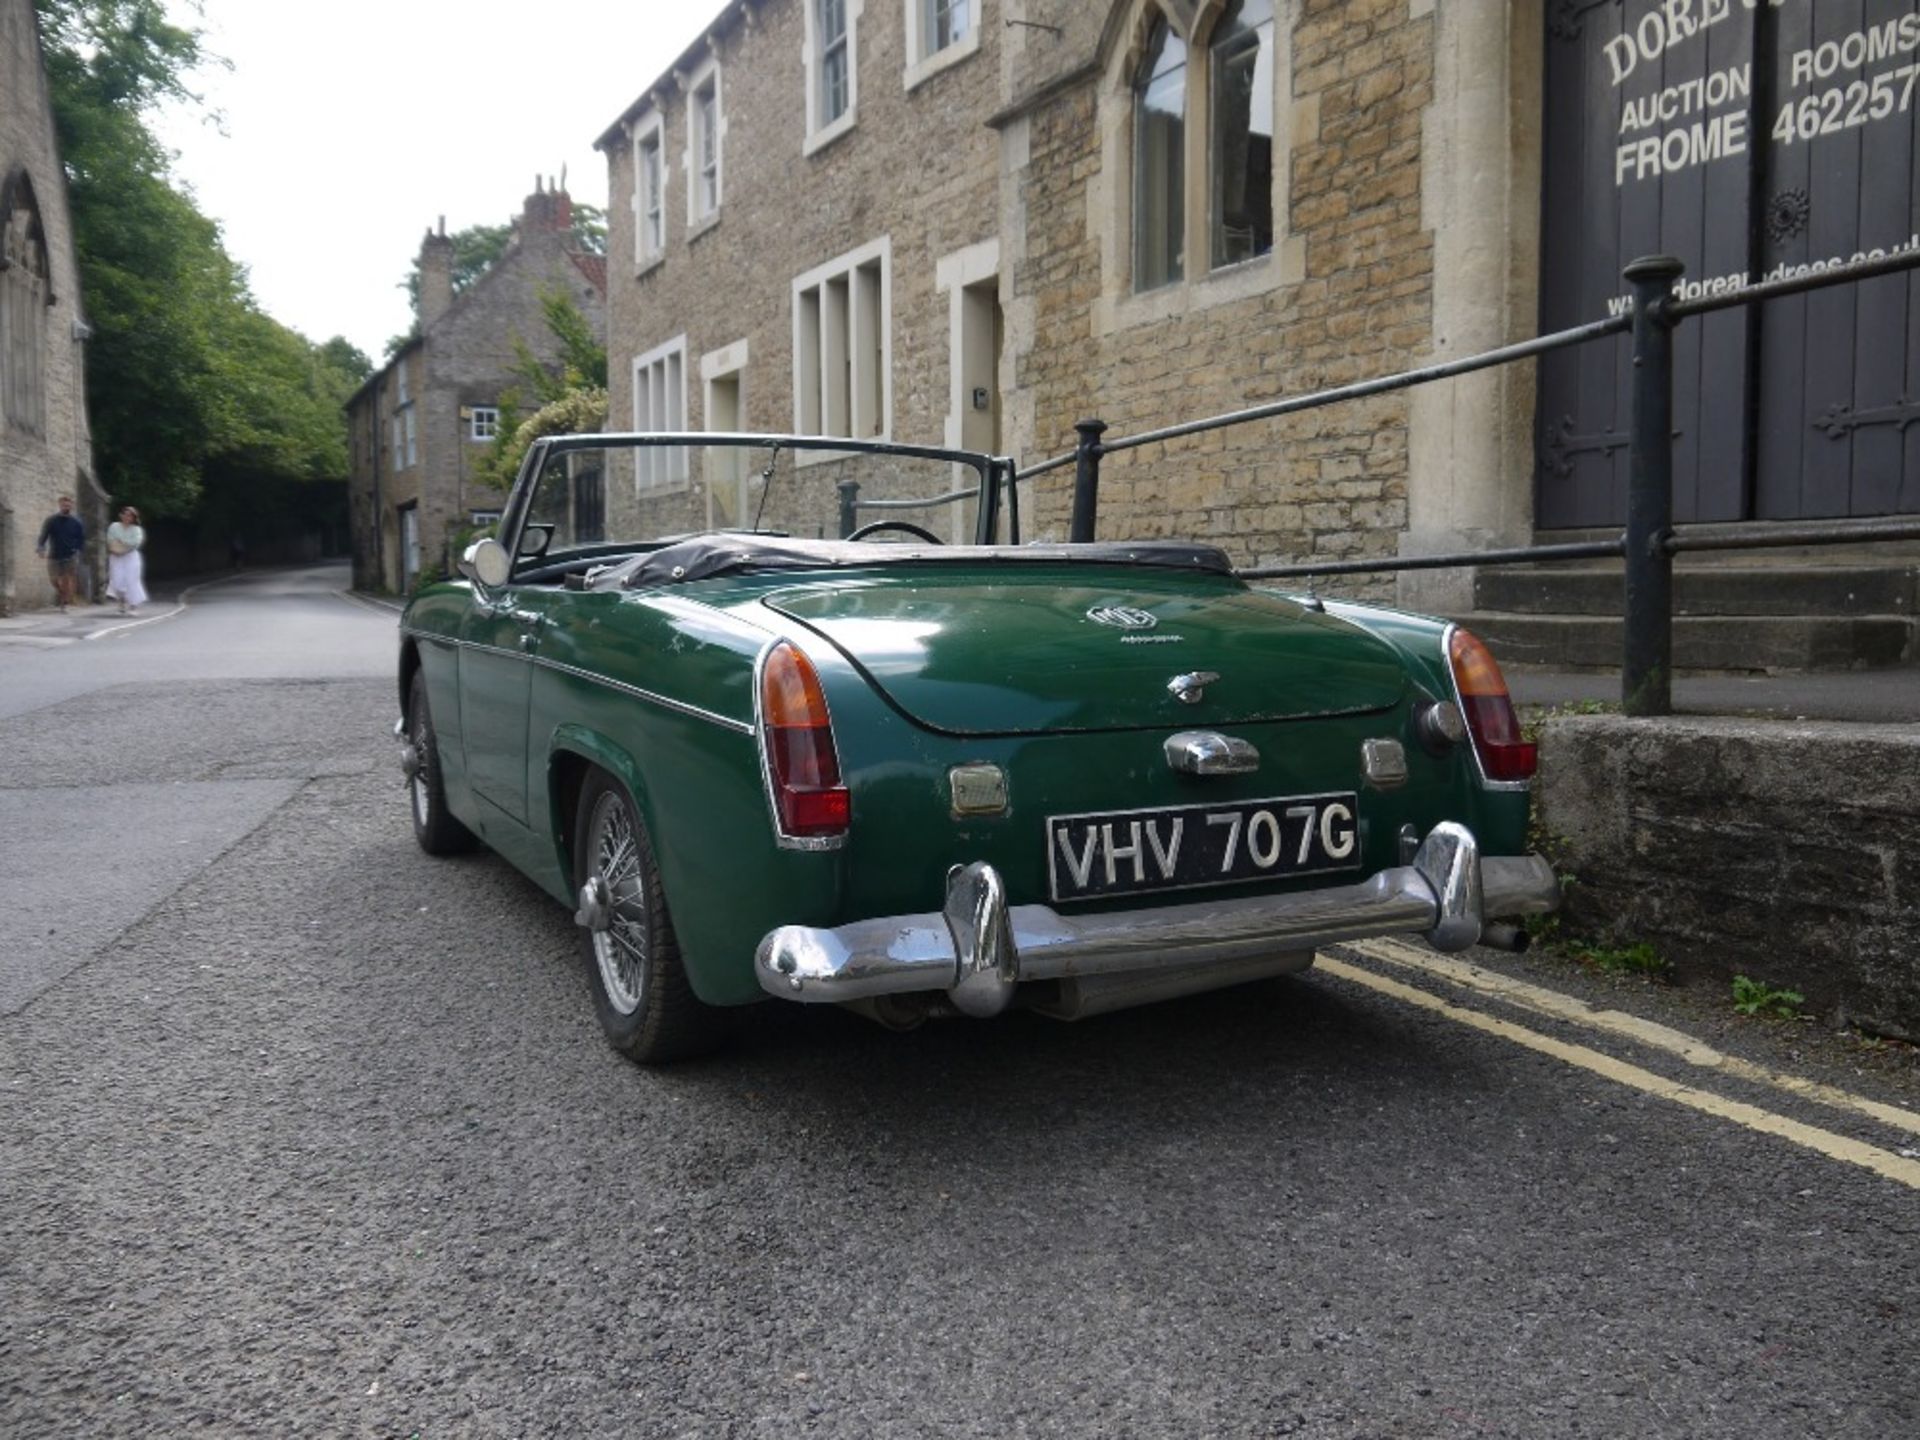 1968 MG MIDGET MARK III Registration Number: VHV 707G Chassis Number: G-AN4/67396-G Recorded - Image 4 of 21